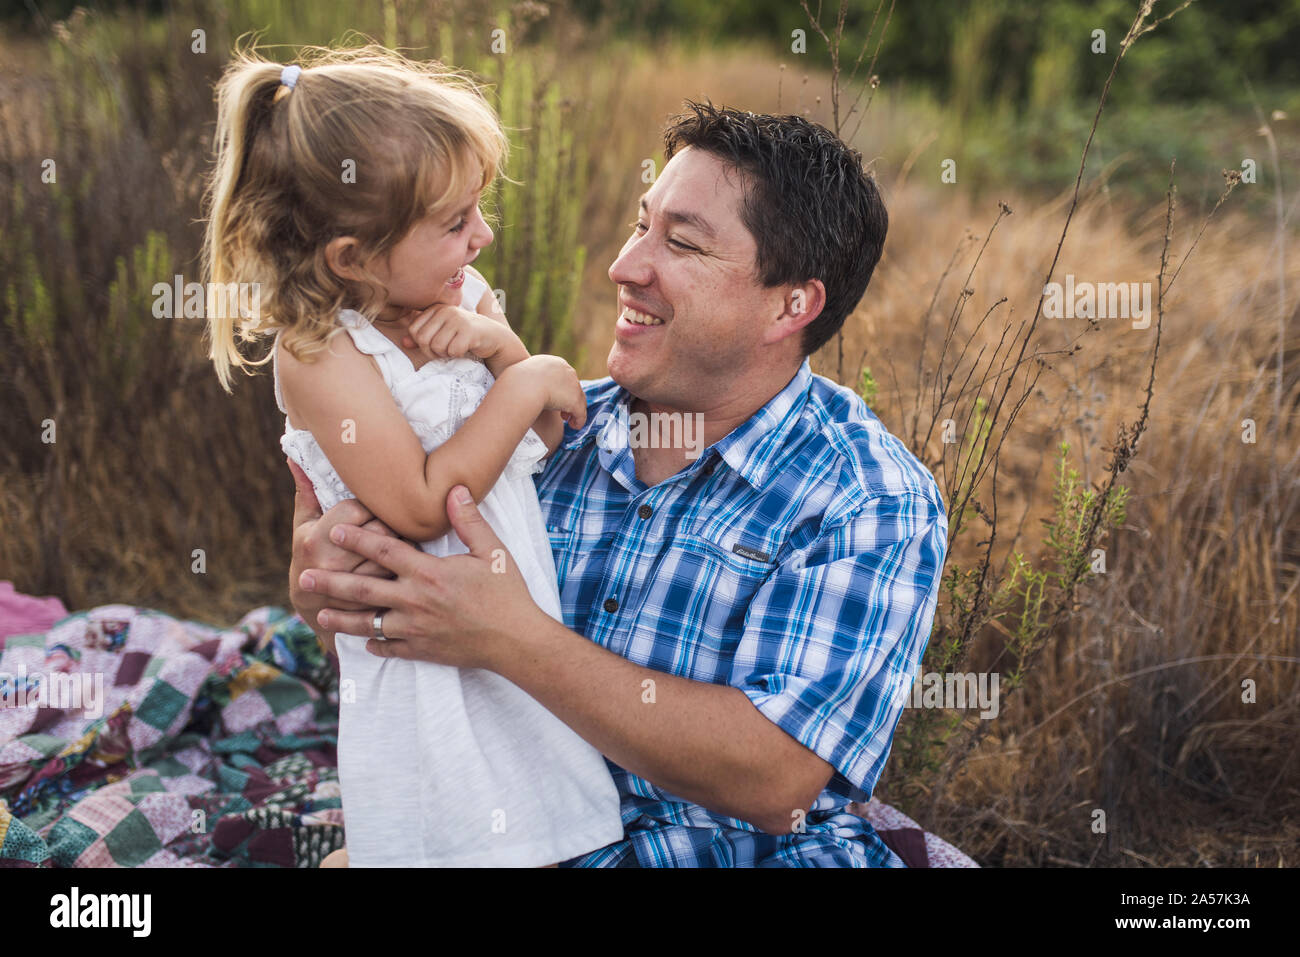 Dad and young daughter laughing together outdoors on a quilt Stock Photo